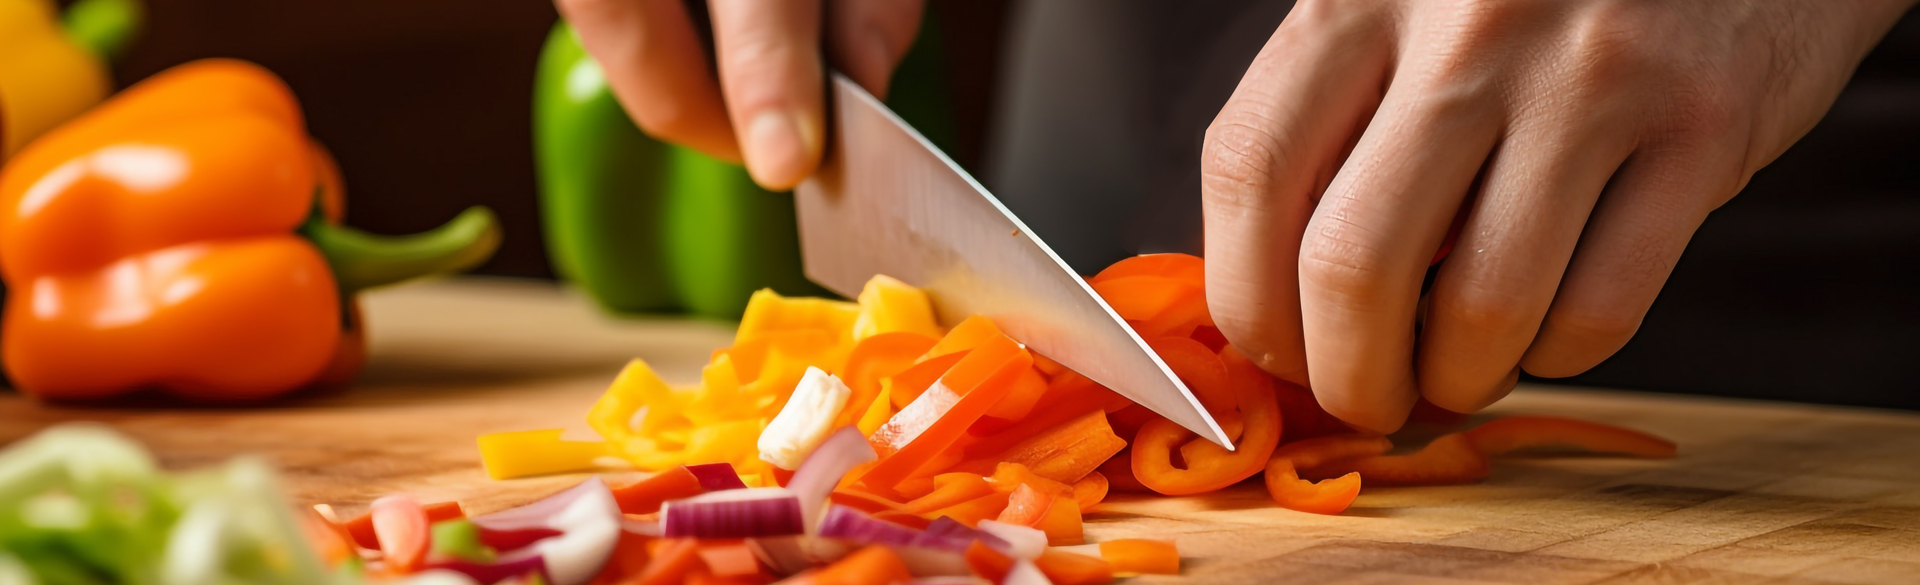 Cutting vegetables 